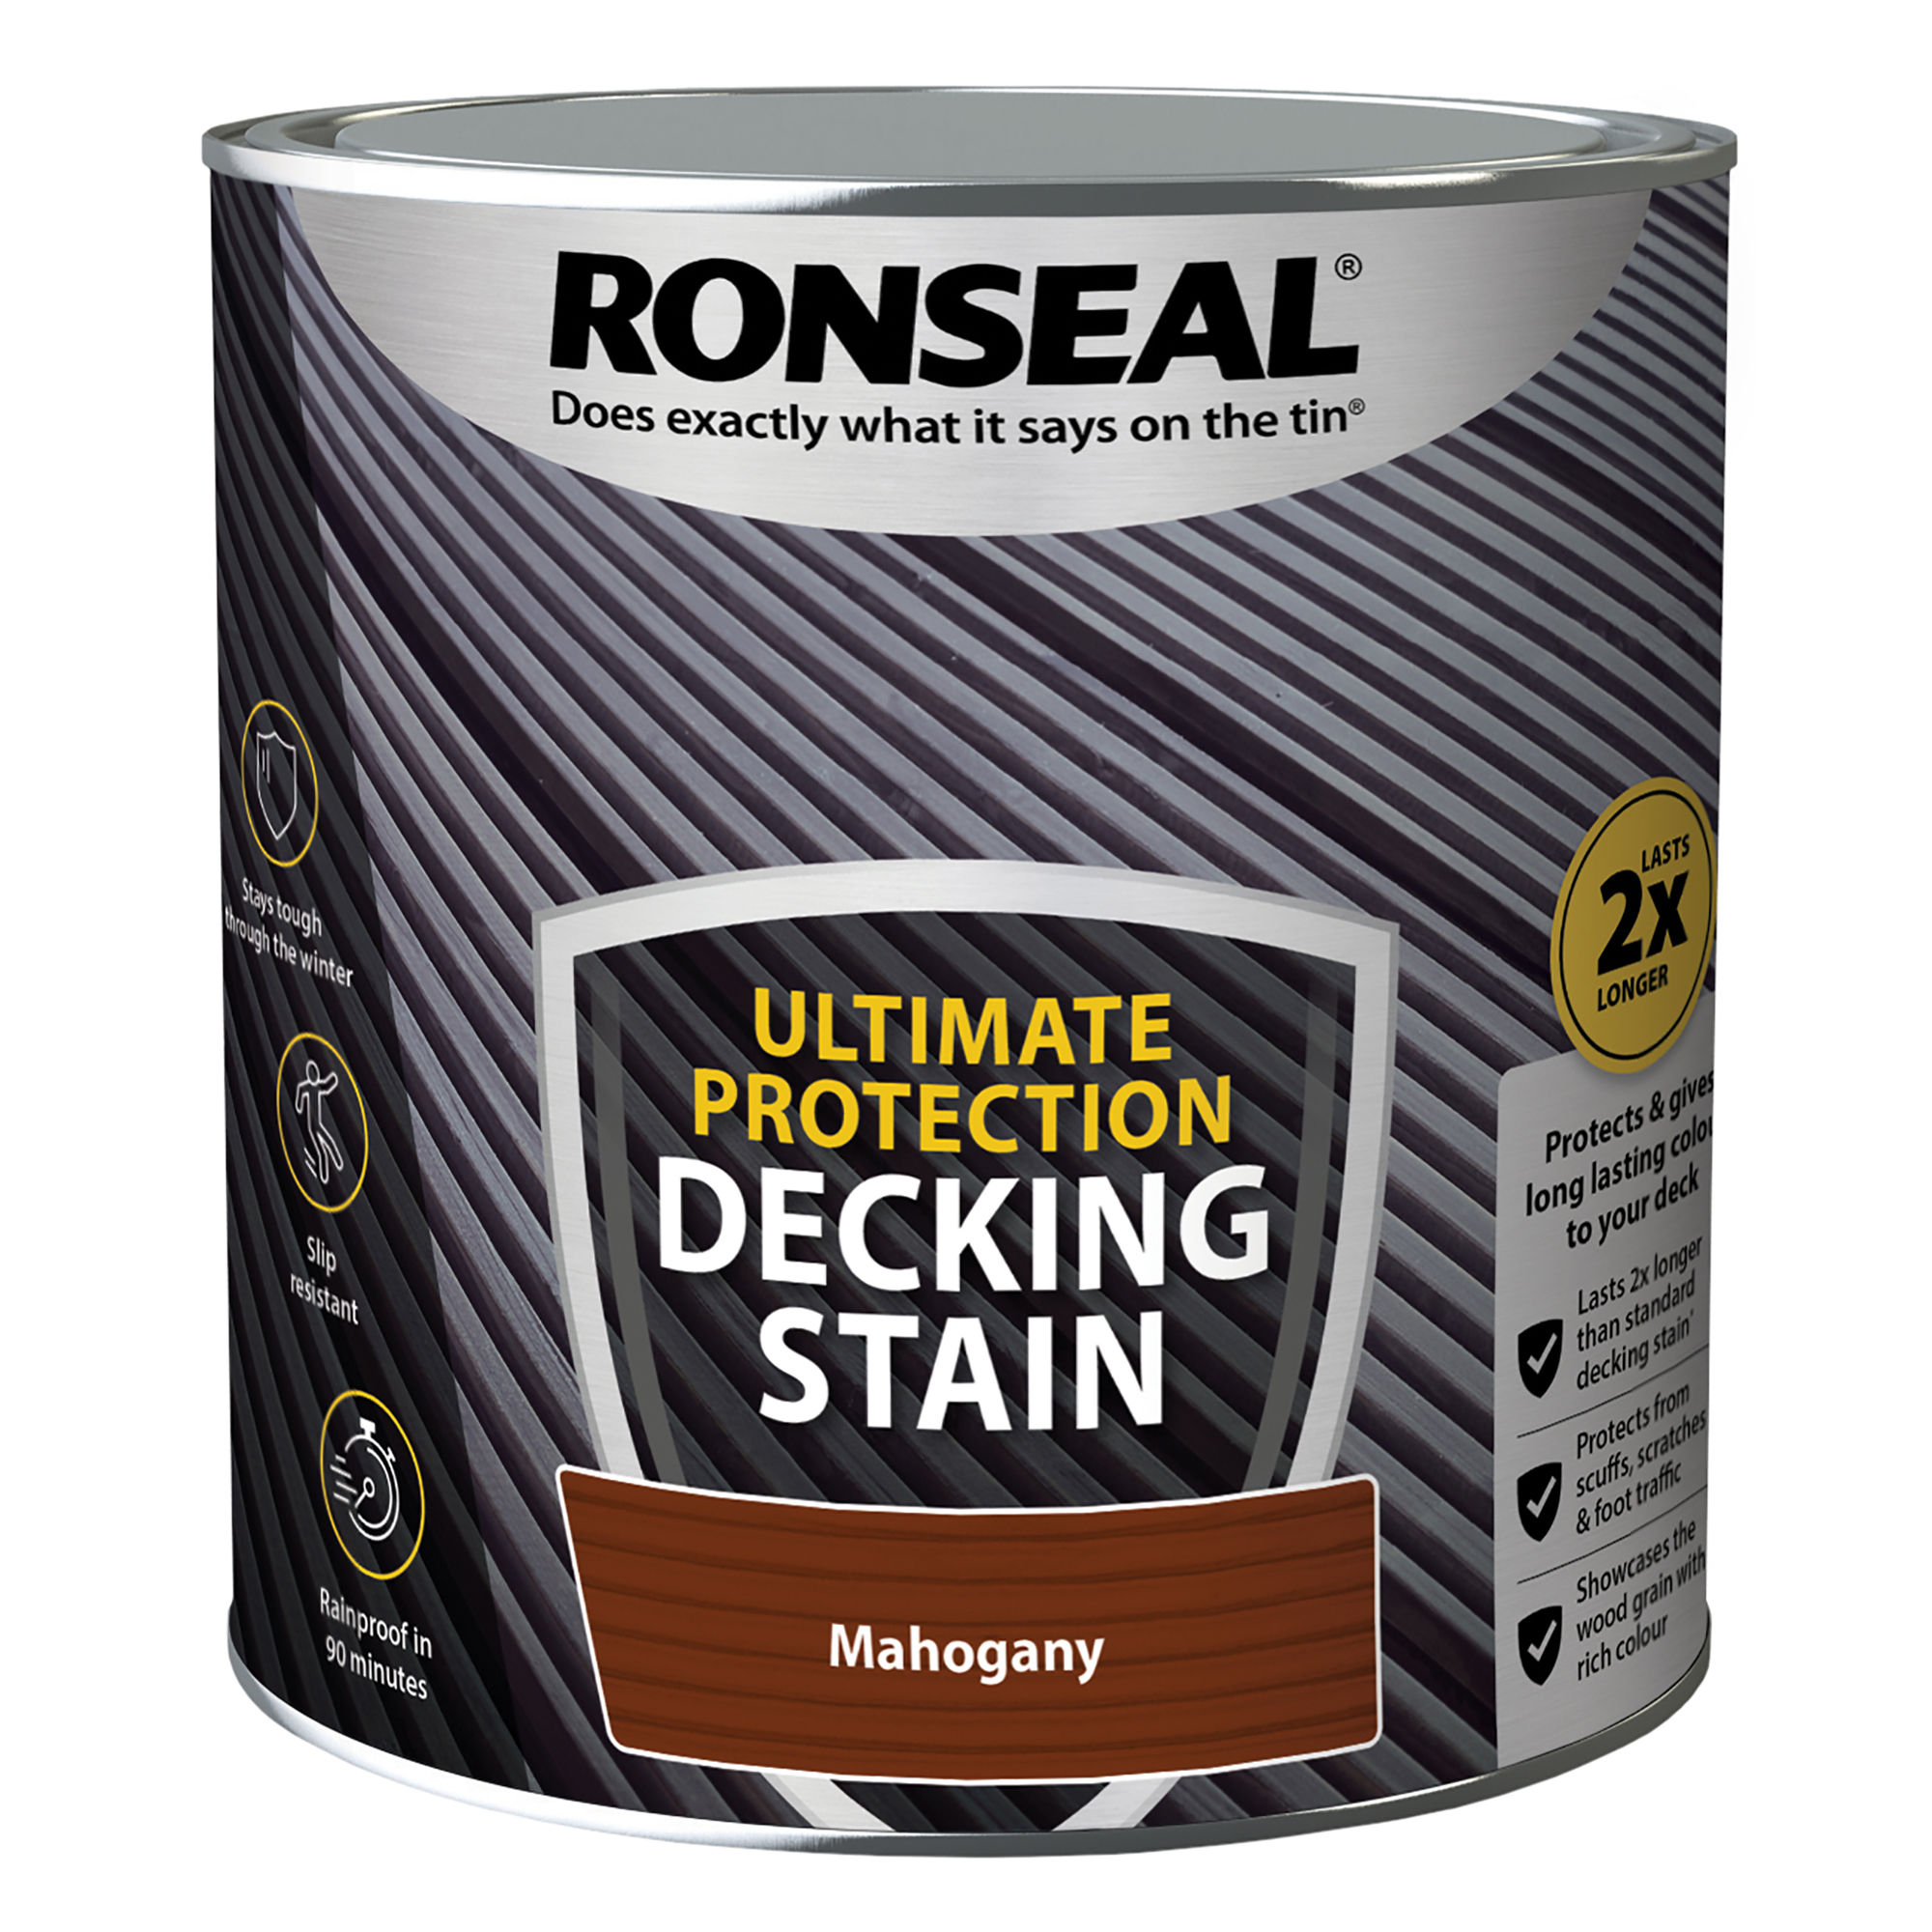 Ronseal Ultimate Protection Decking Stain - Mahogany (2.5L)